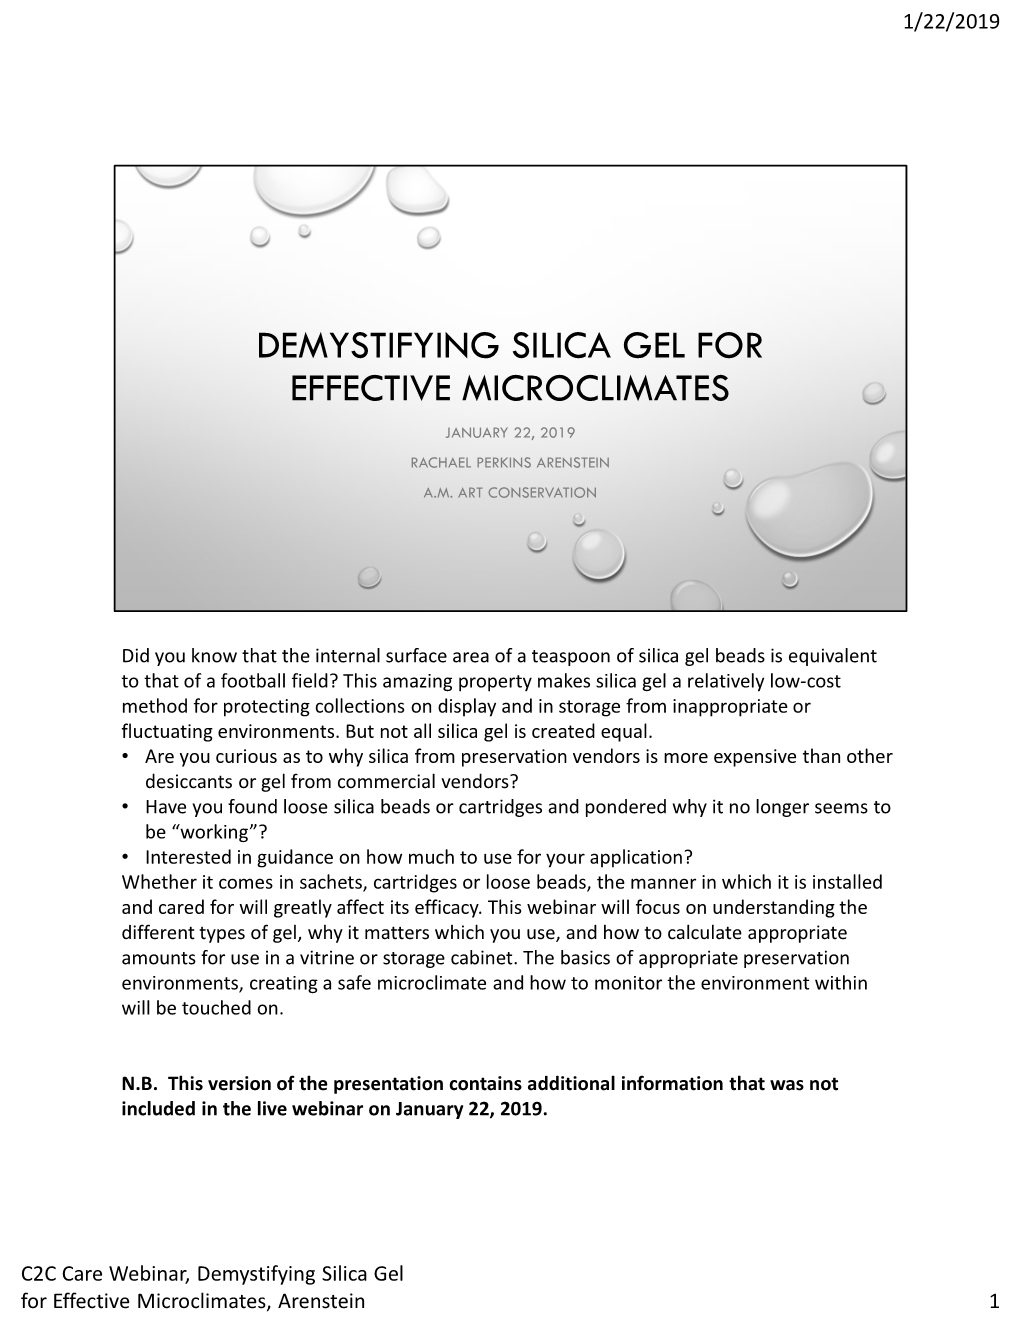 Demystifying Silica Gel for Effective Microclimates January 22, 2019 Rachael Perkins Arenstein A.M